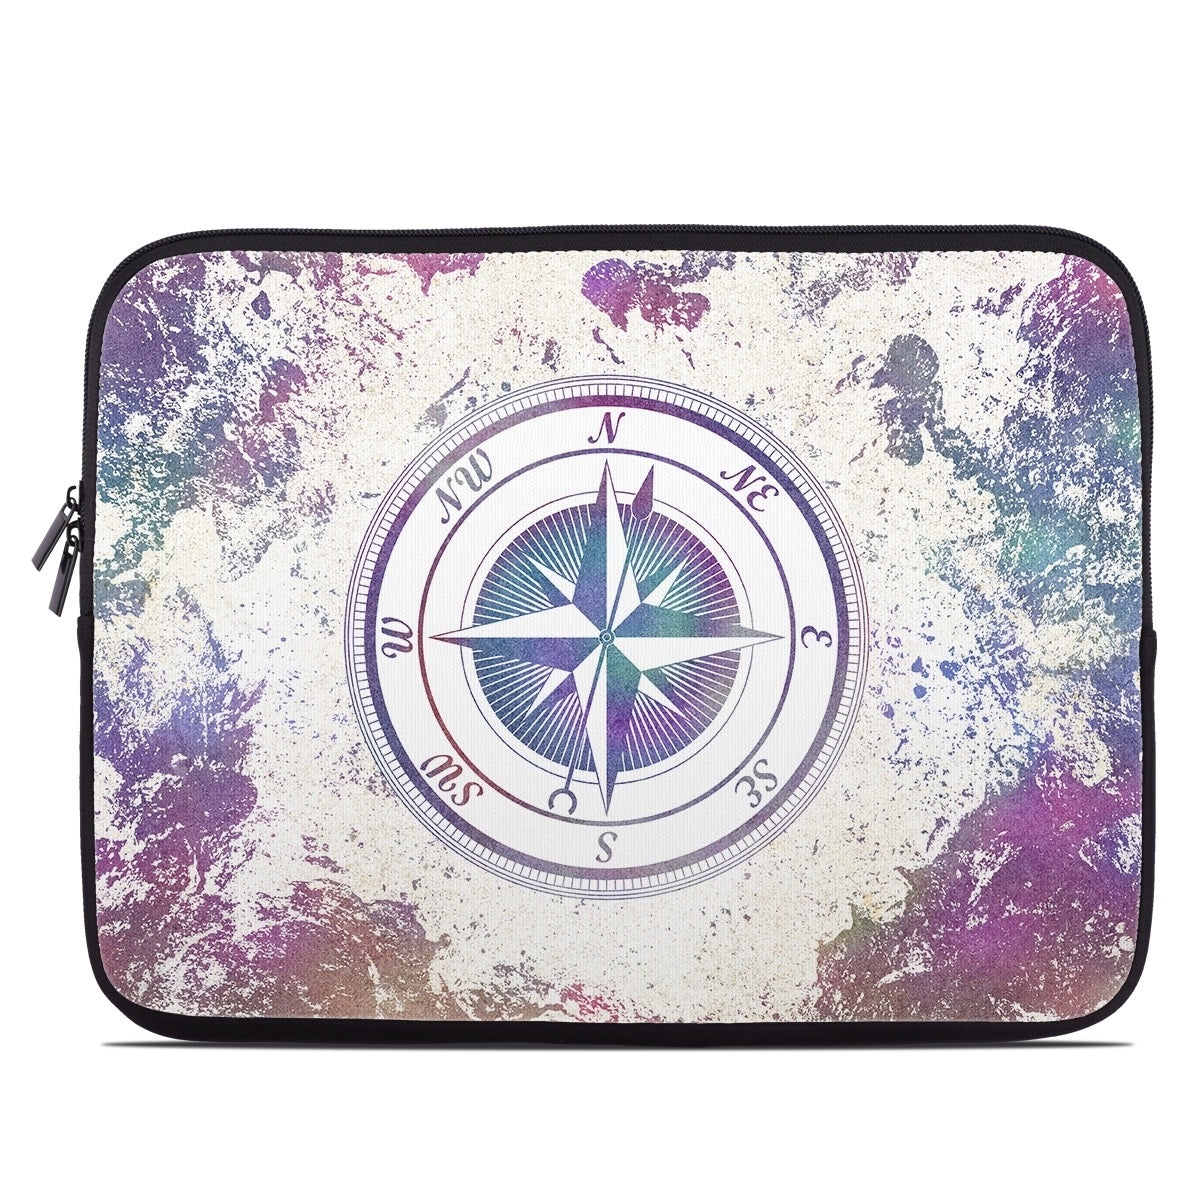 Find A Way - Laptop Sleeve